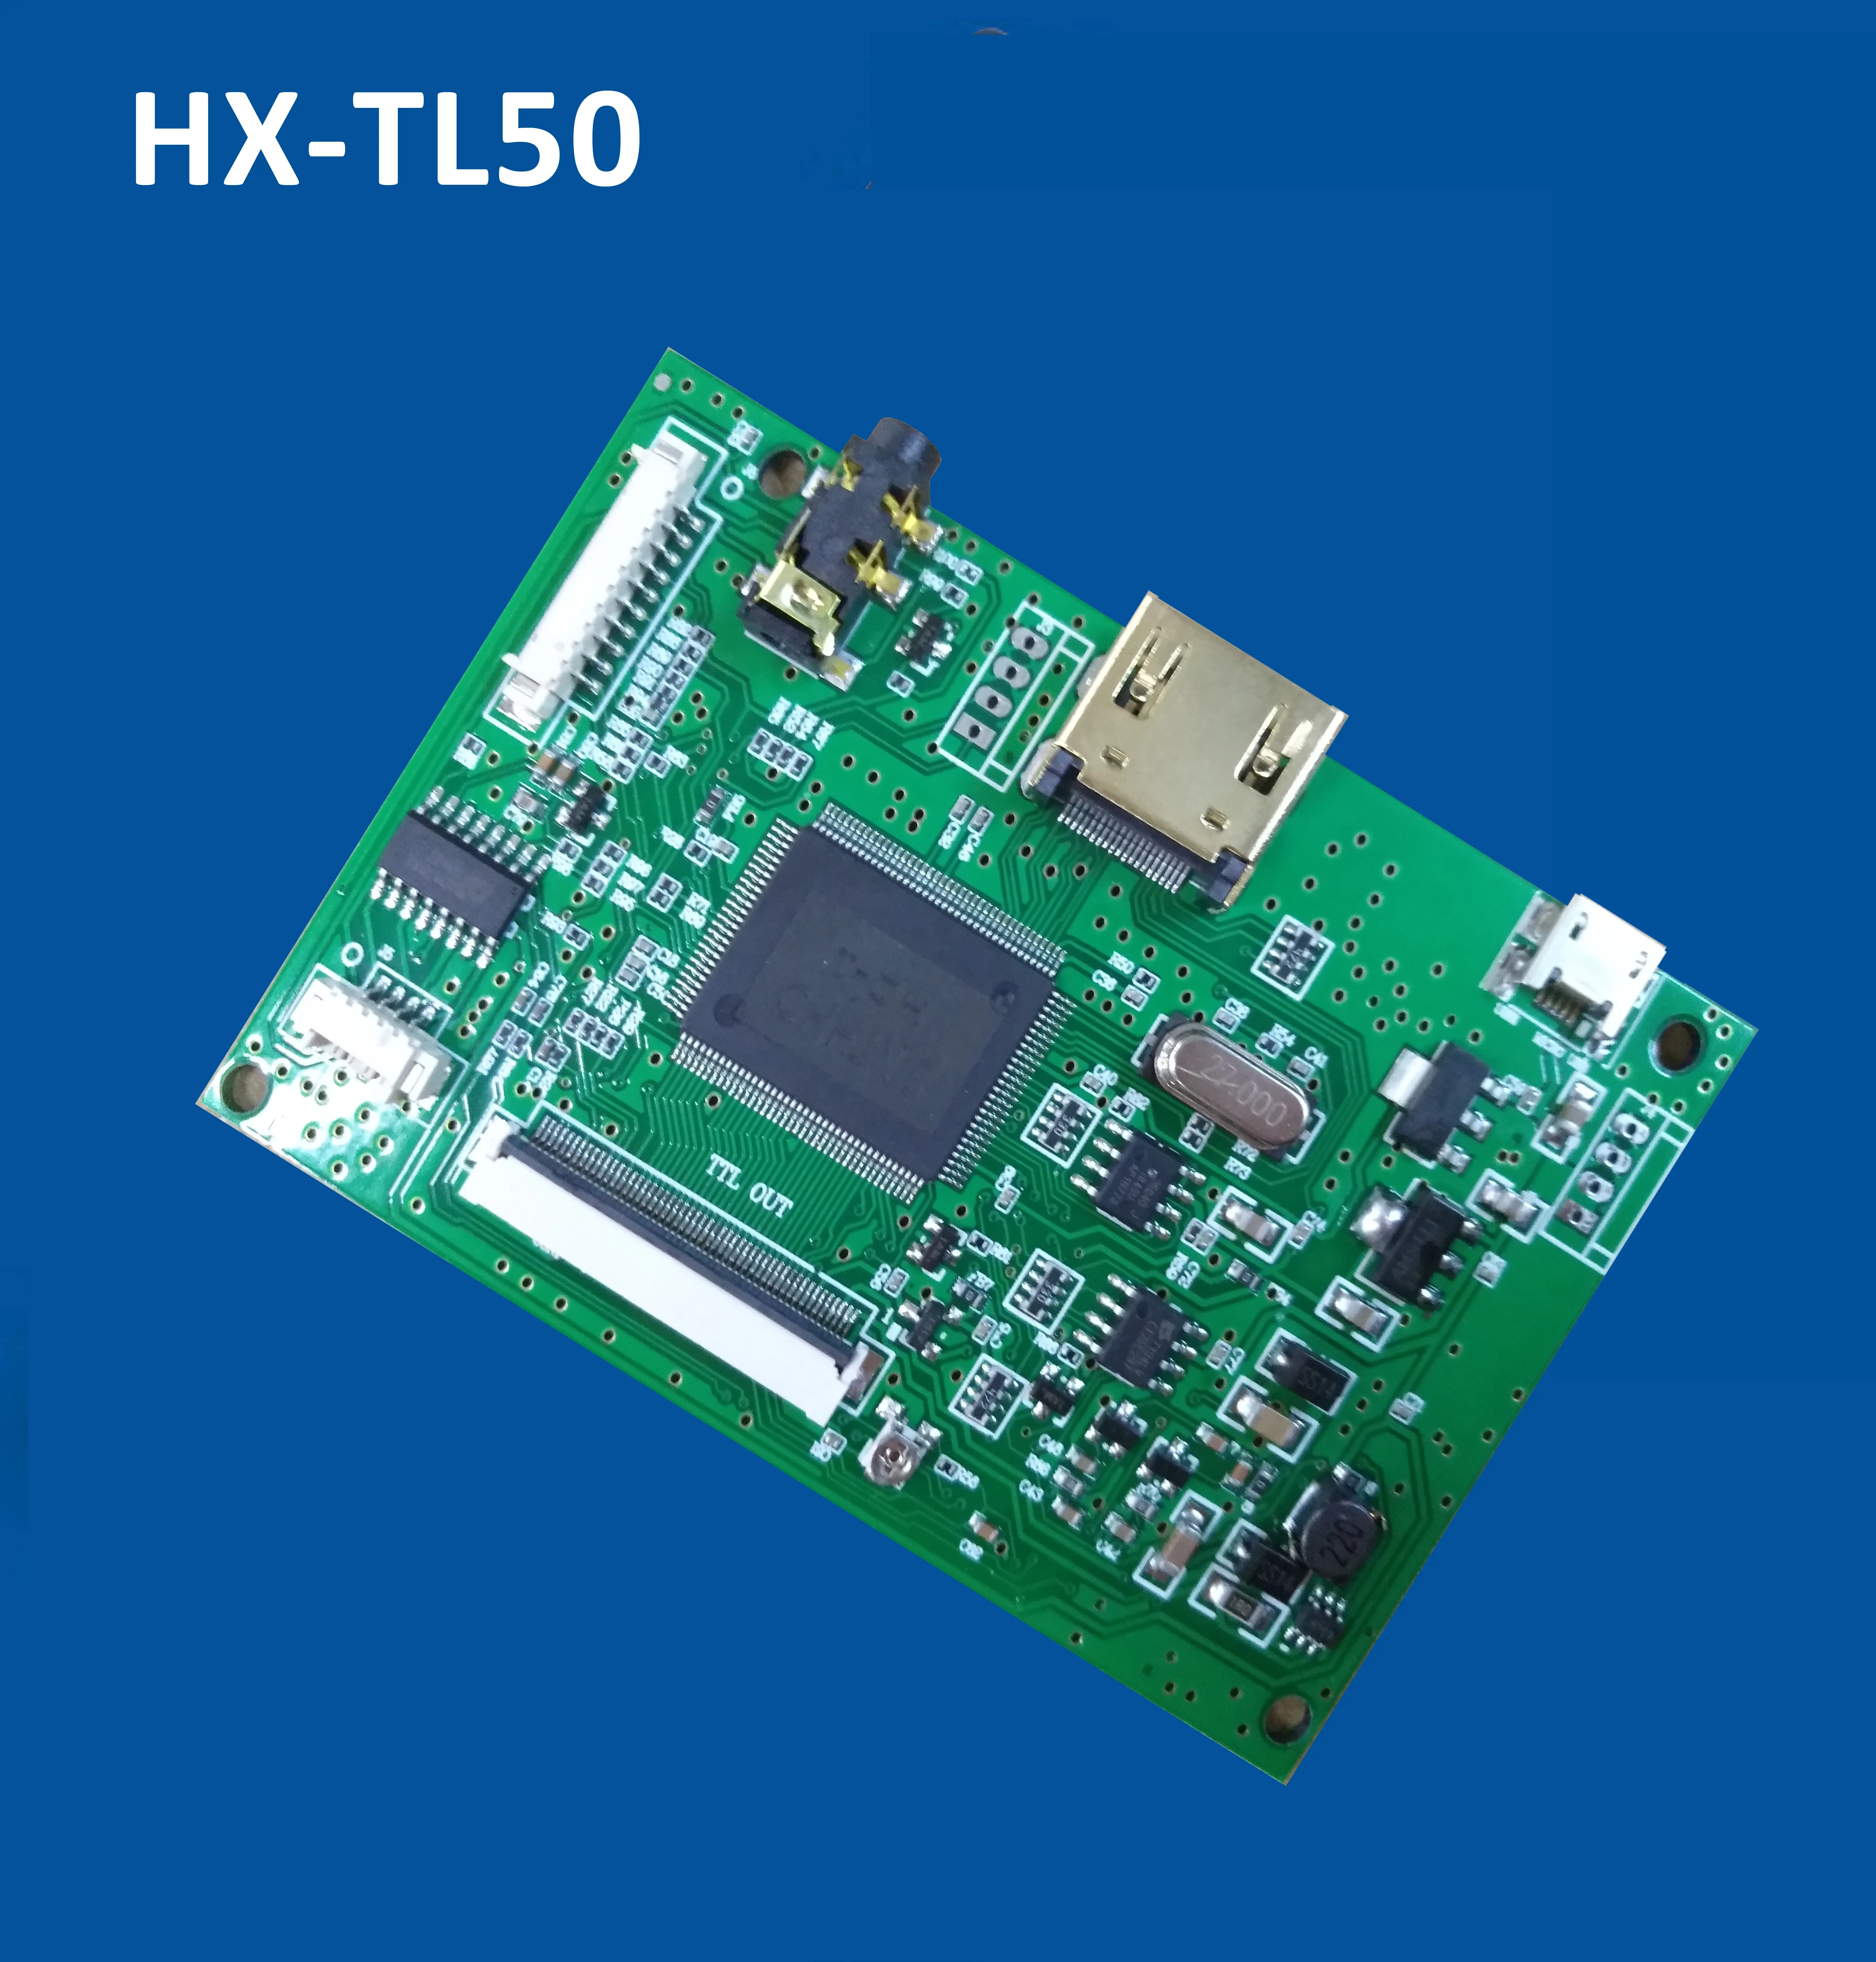 HX-TL50 HD LCD 50pin TTL panel driver board HDM-TTL controller with 5V USB power supply and panel cable FPC included